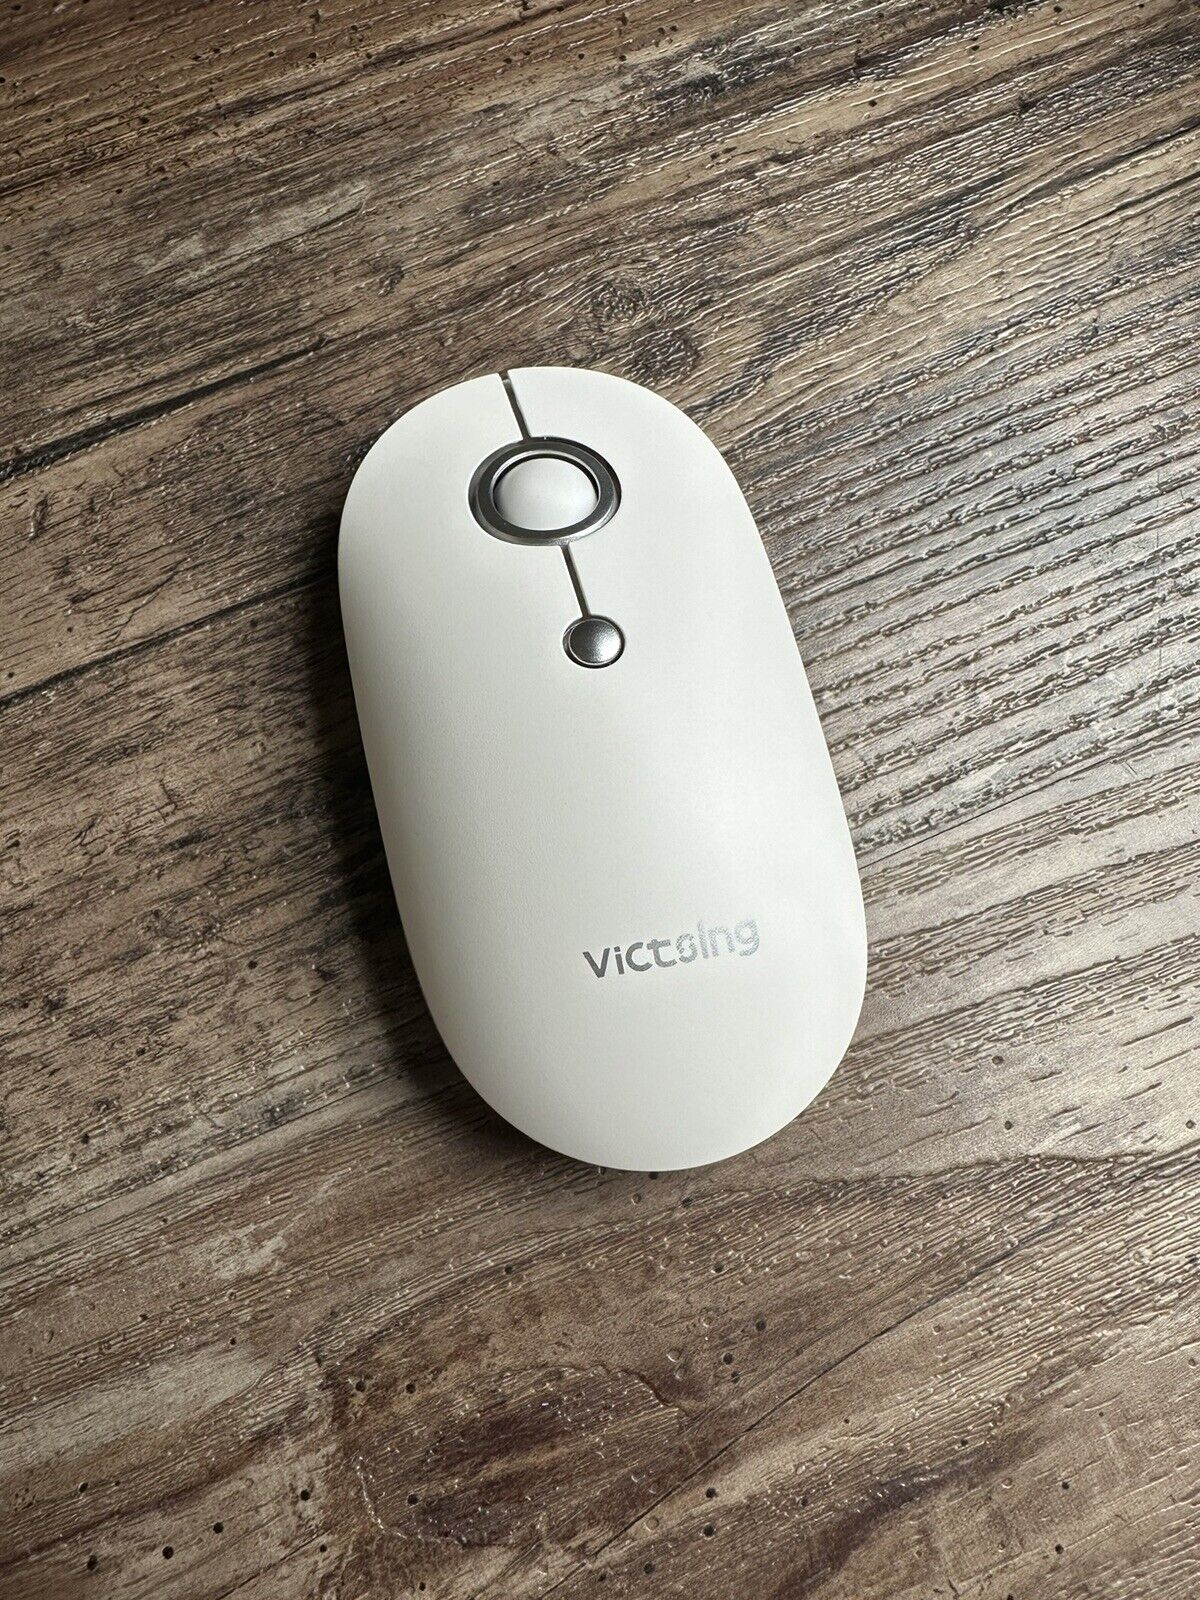 Victsing 2.4G Silent Slim Wireless Mouse Cordless Quiet Mice USB Receiver for PC